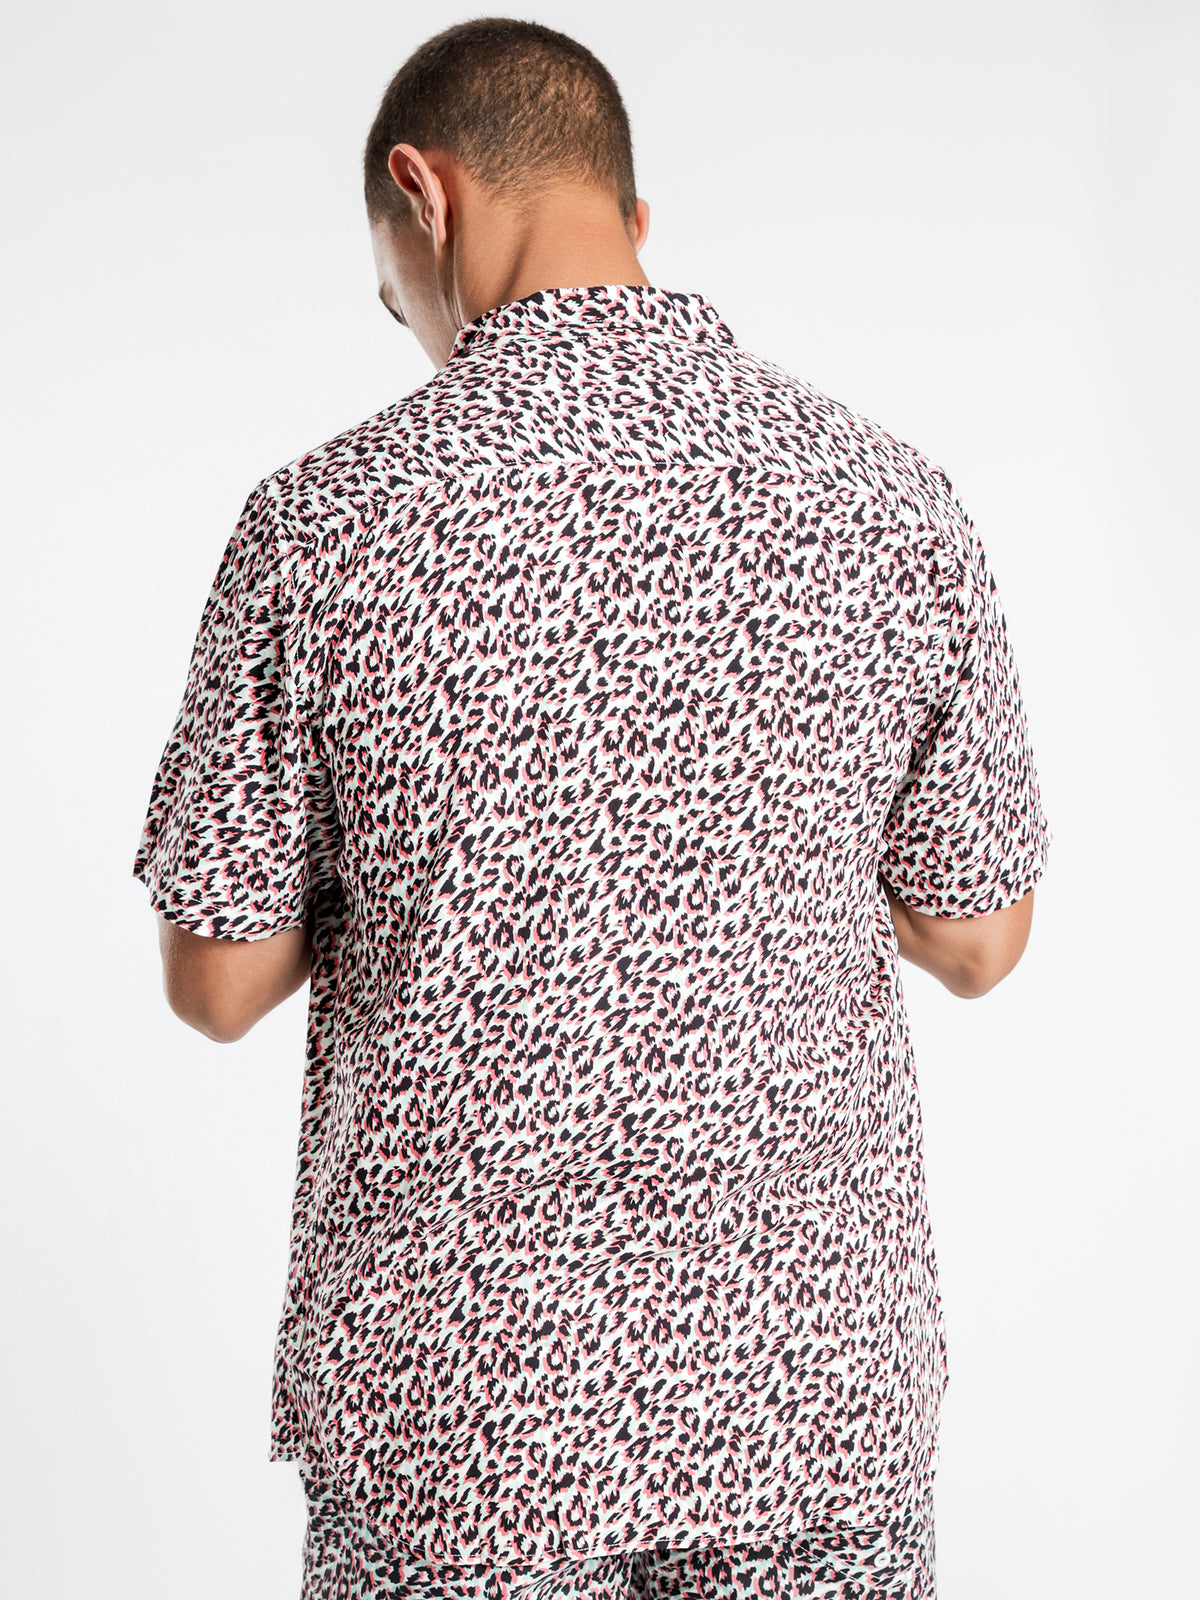 Holiday Short Sleeve Shirt in White Leopard